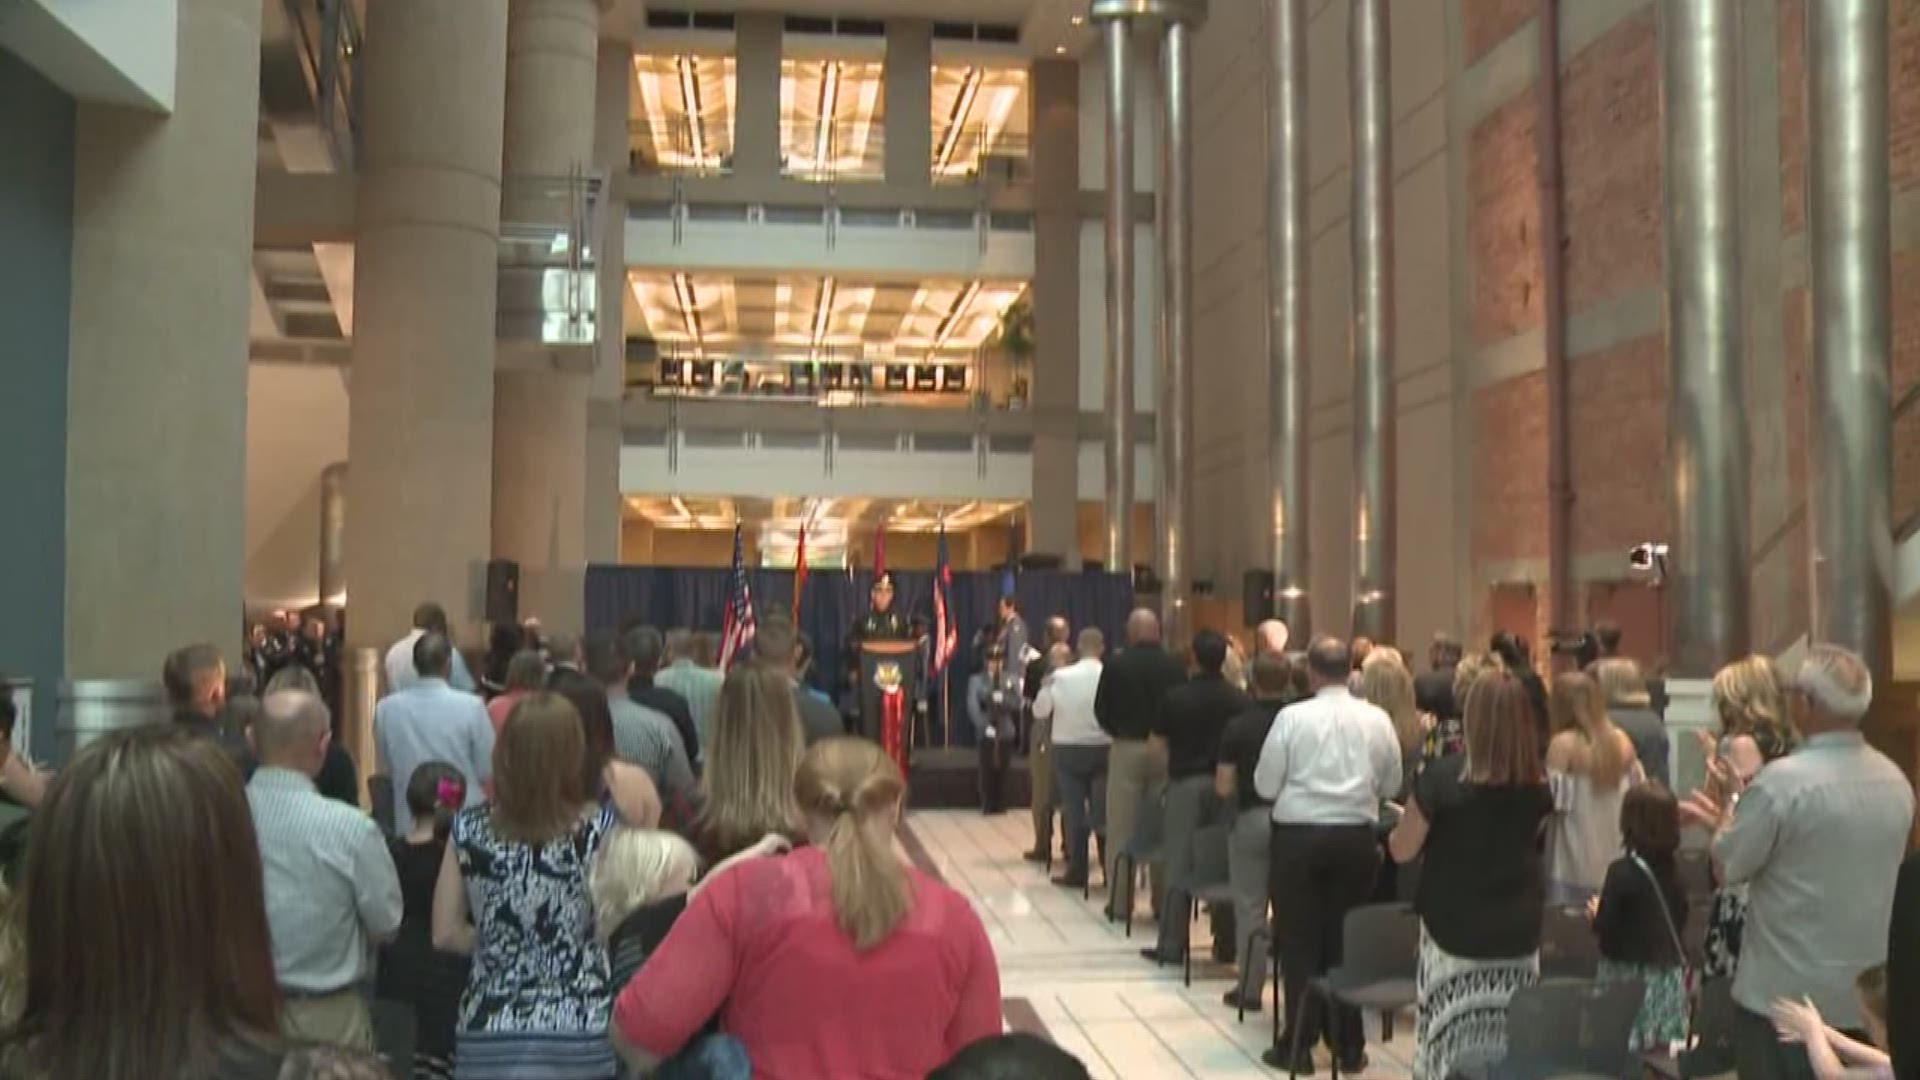 A ceremony at the Phoenix City Hall took place Thursday as a tribute to fallen officers including Officer David Glasser.